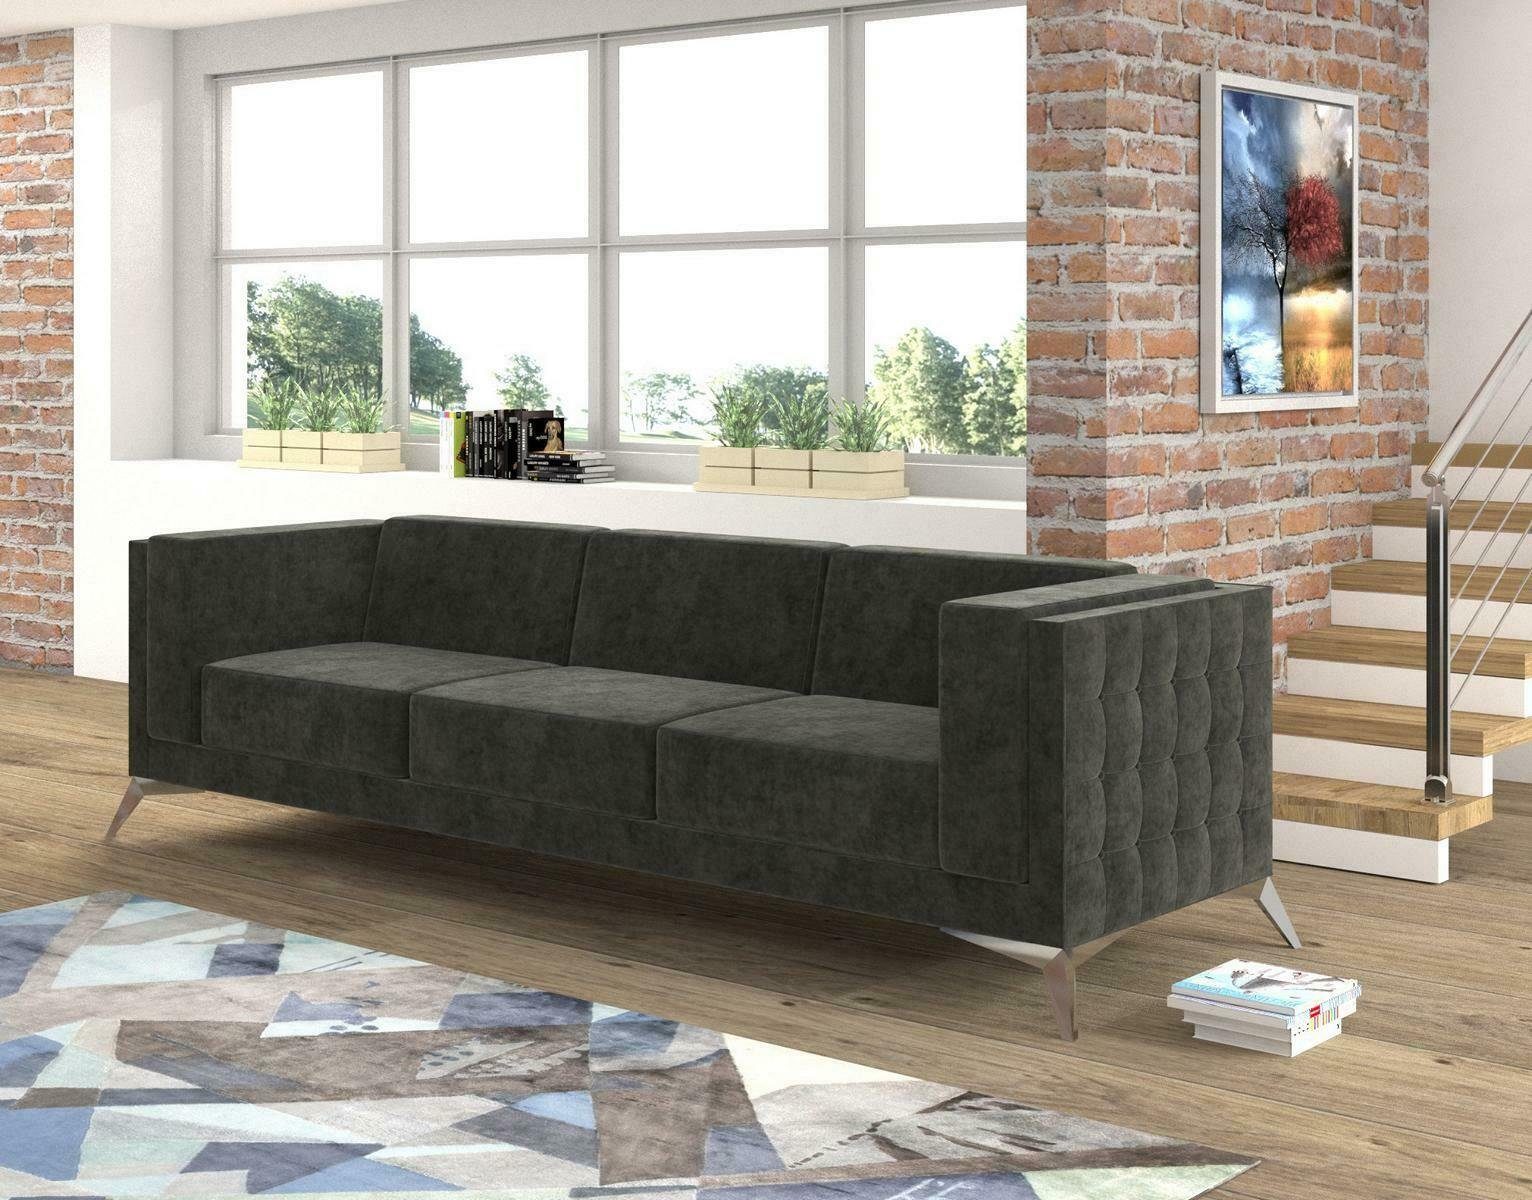 JVmoebel Sofa Design Sofa Couch Sitzer Couch Dreisitzer Sofas Dreisitzer 3 Neu, Polster Sofas Chesterfield Design 3 Sitzer Polster Neu Sofa